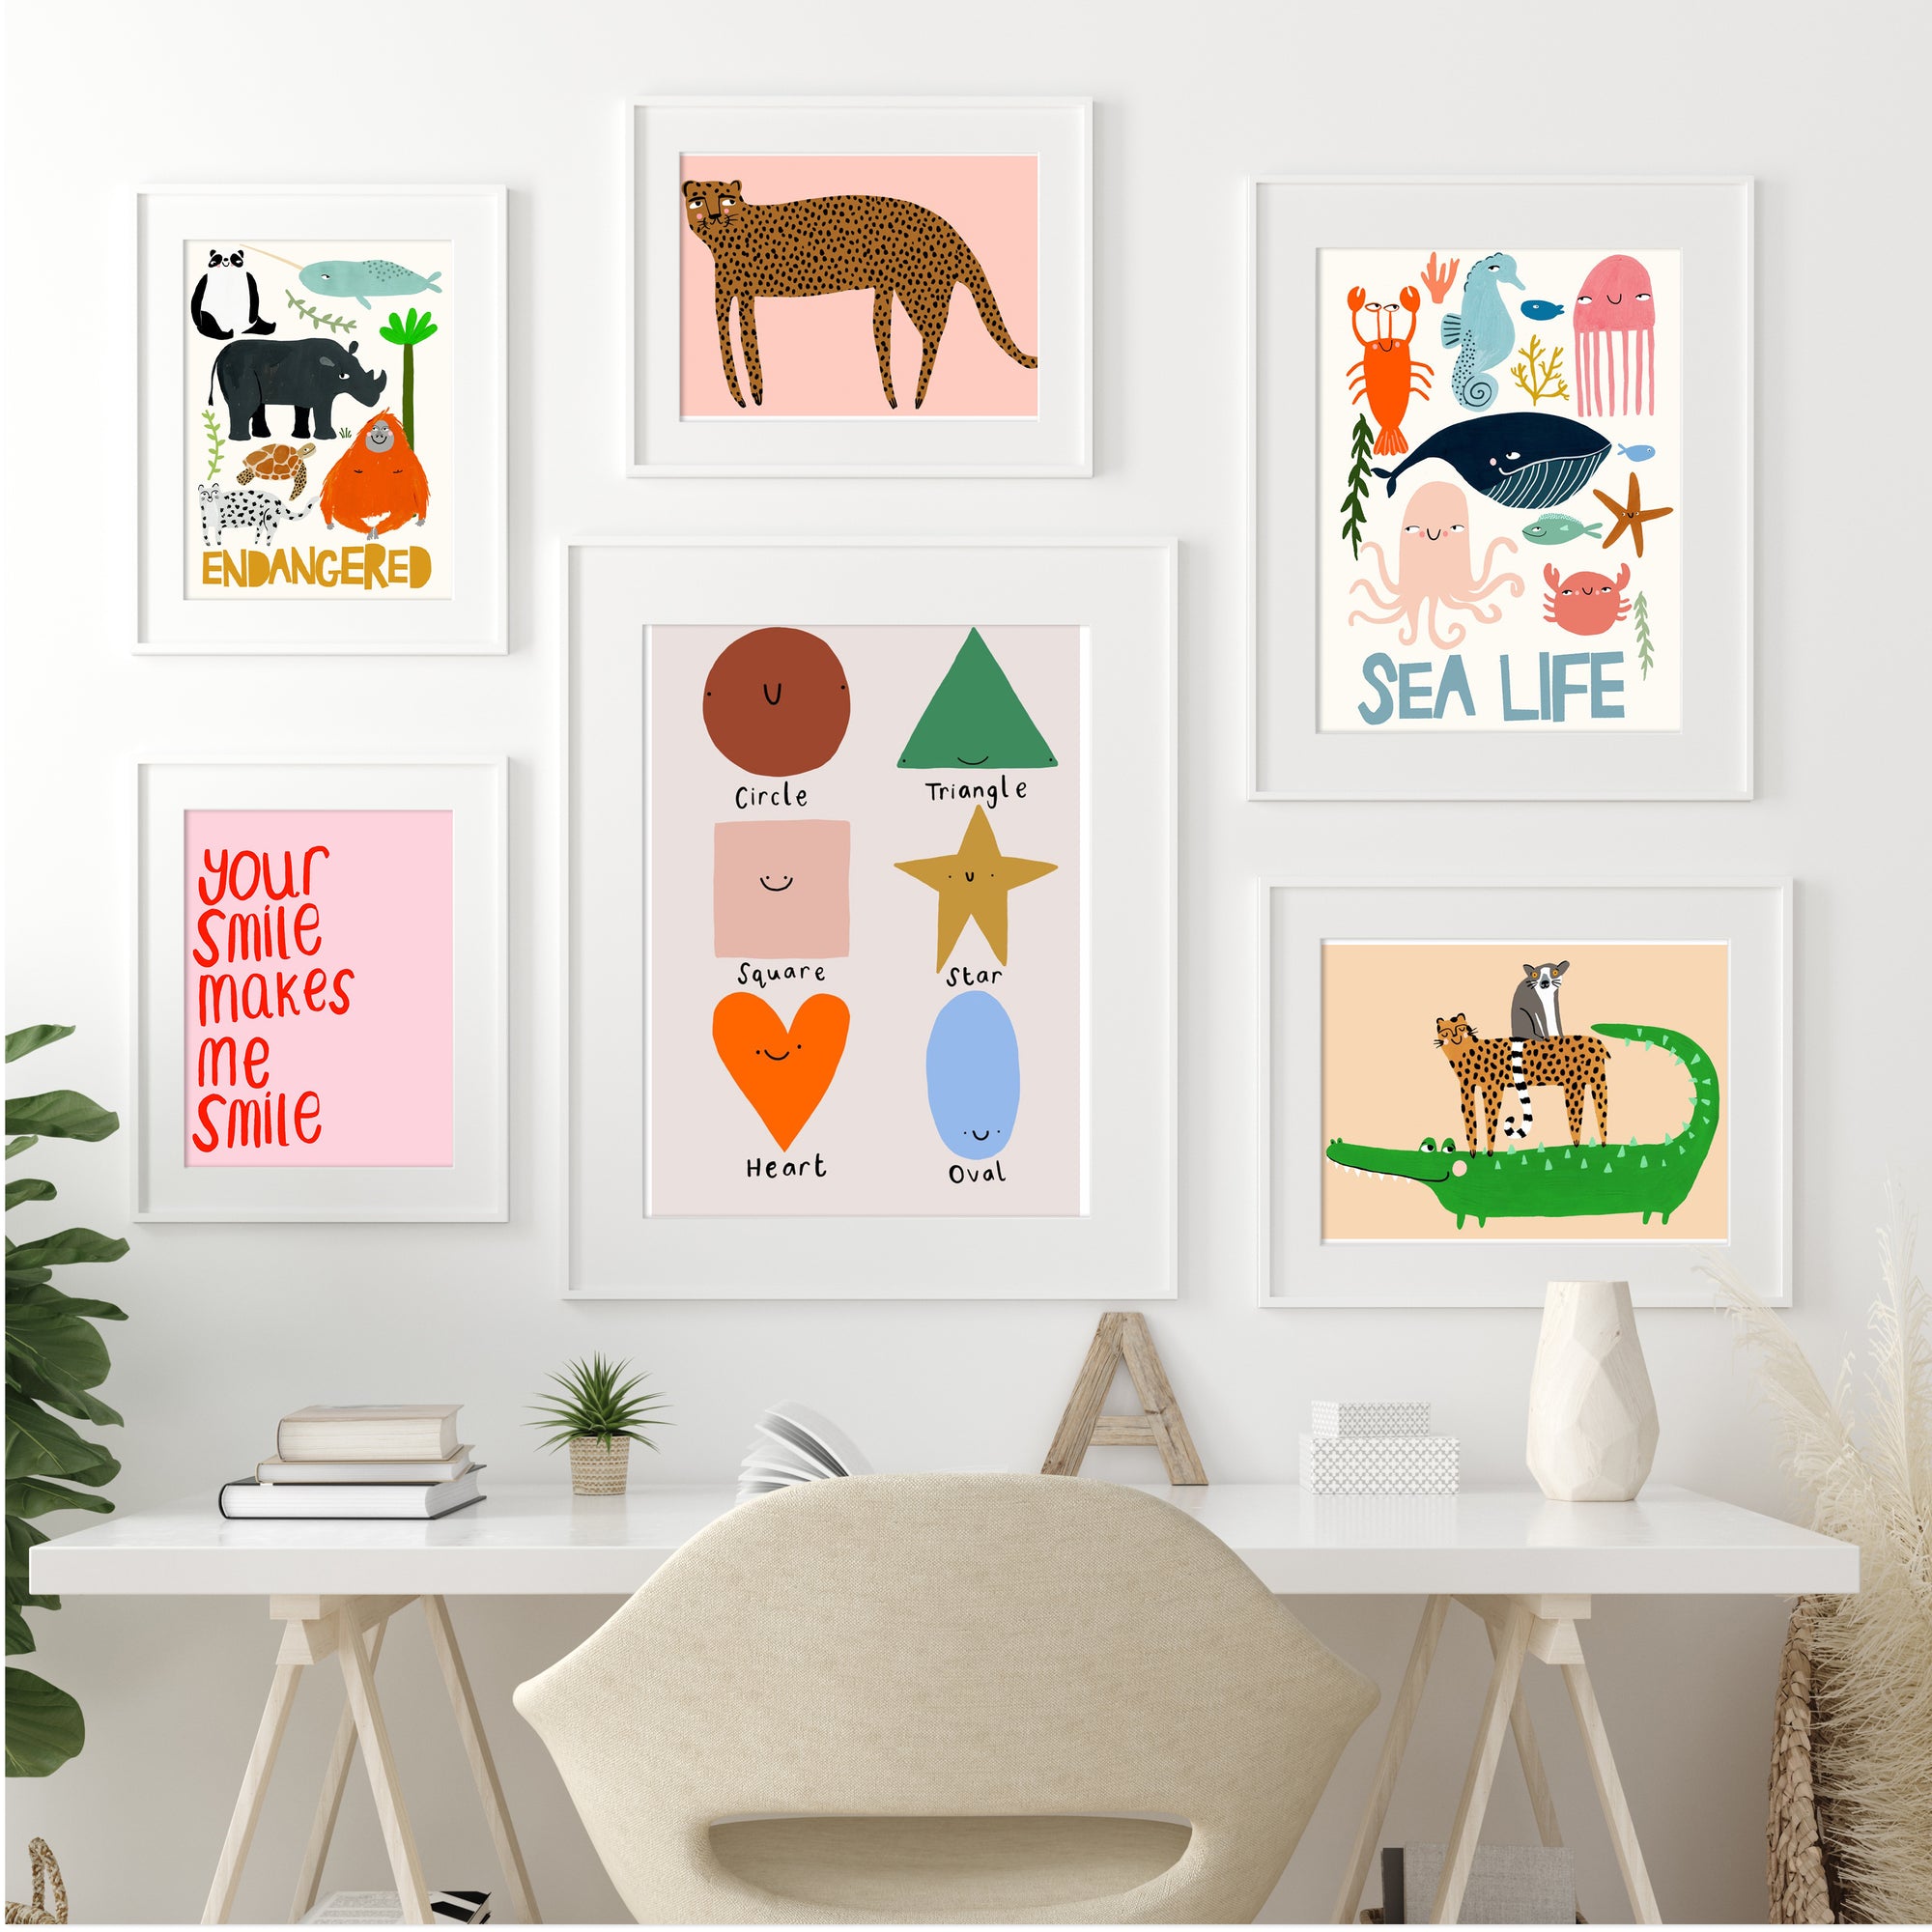 How to create a gallery wall in a nursery or child's room